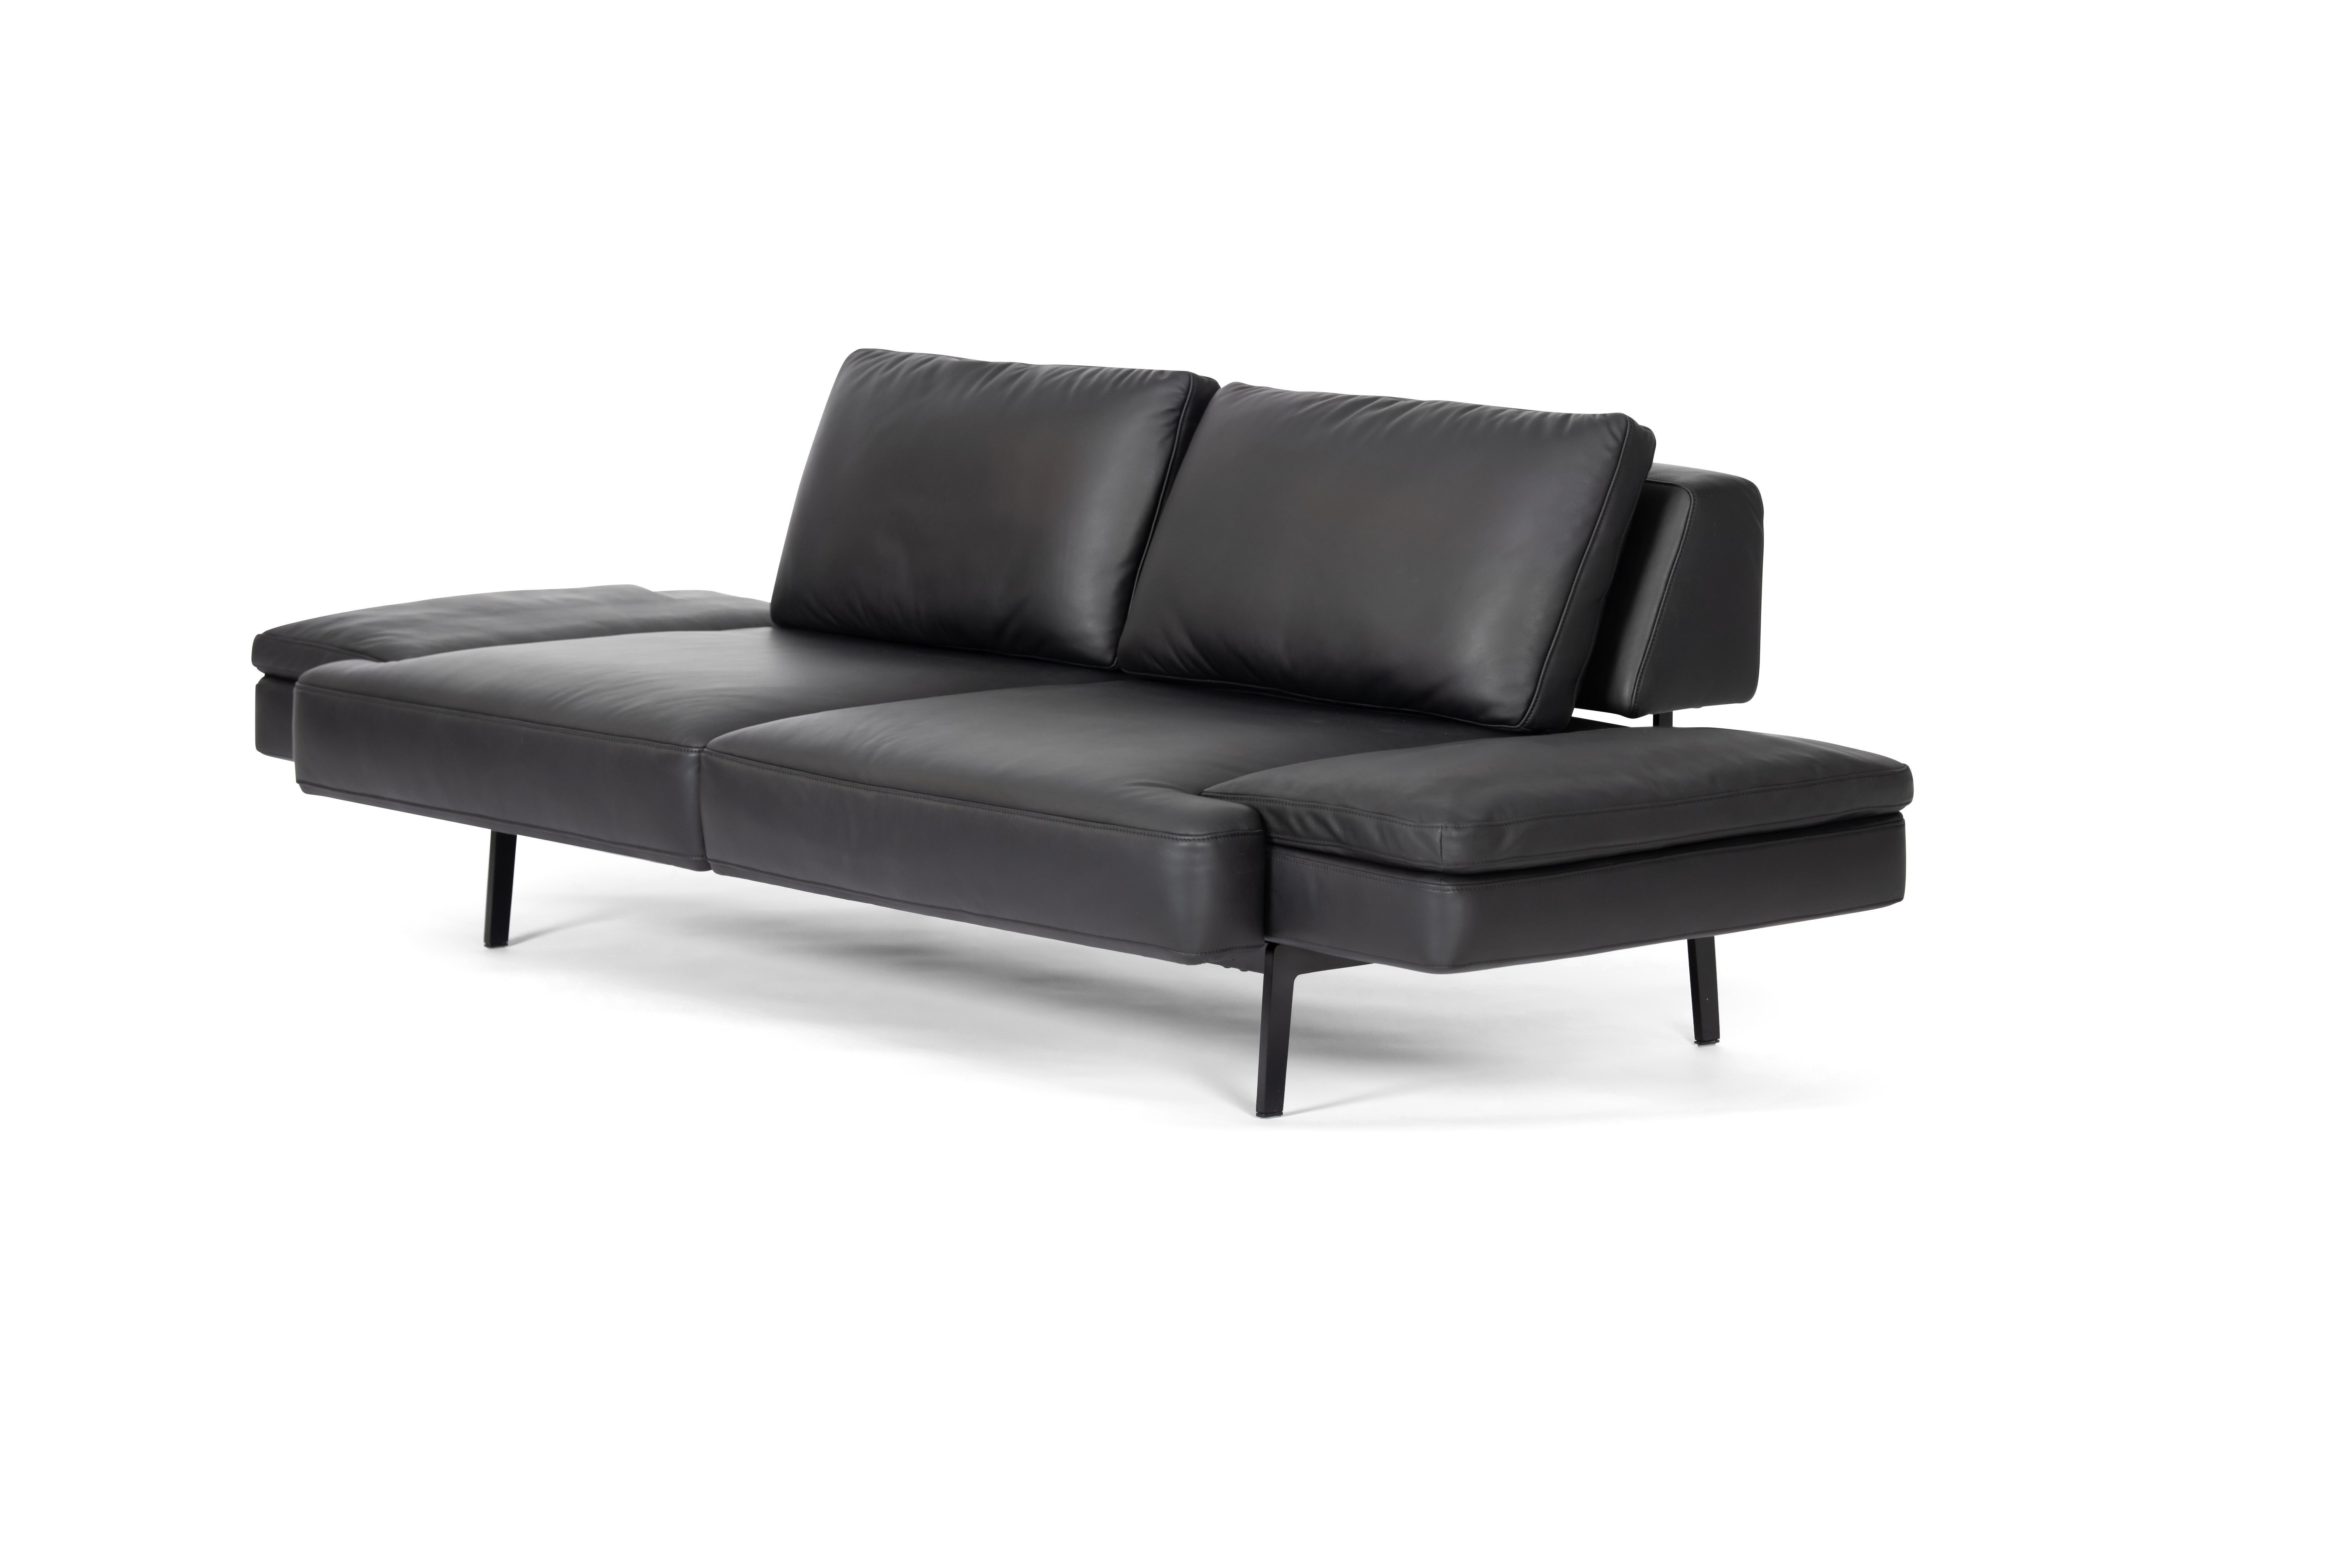 DeSede DS-747/02 Multifunctional Sofa in Black Leather Seat and Back Upholstery In New Condition For Sale In Brooklyn, NY